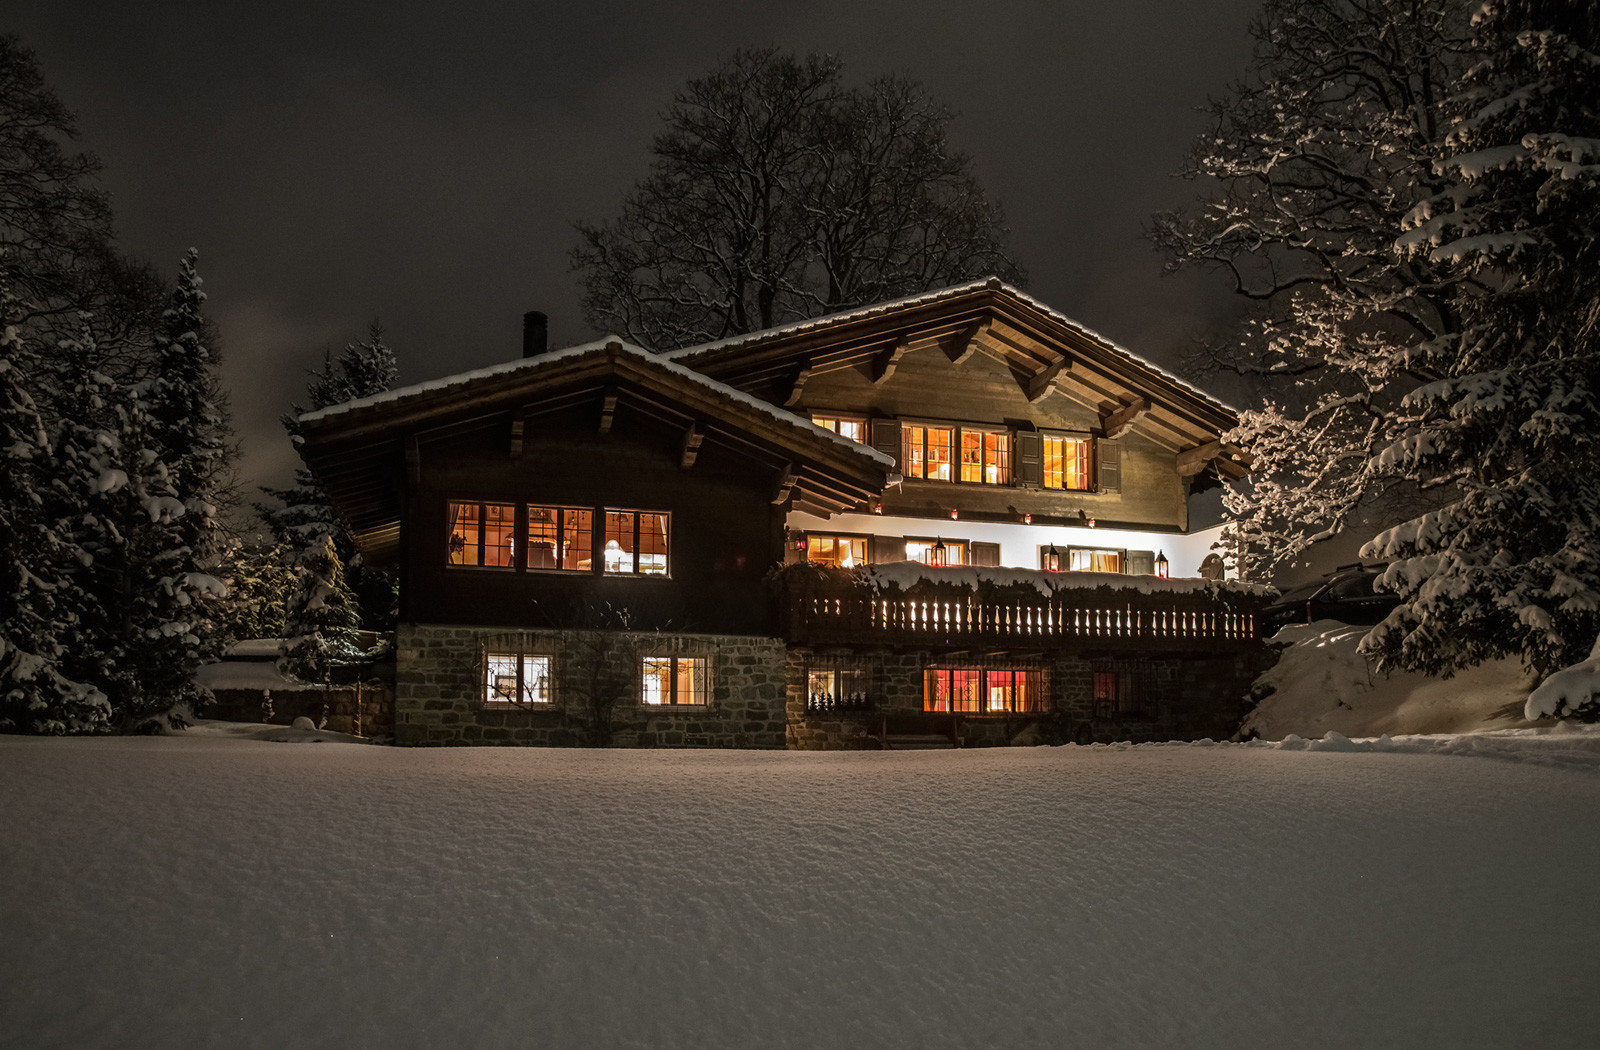 Kings-avenue-klosters-wifi-satellite-sauna-jacuzzi-parking-fireplace-gym-games-dvd-sledges-terraces-balconies-private-garden-area-klosters-004